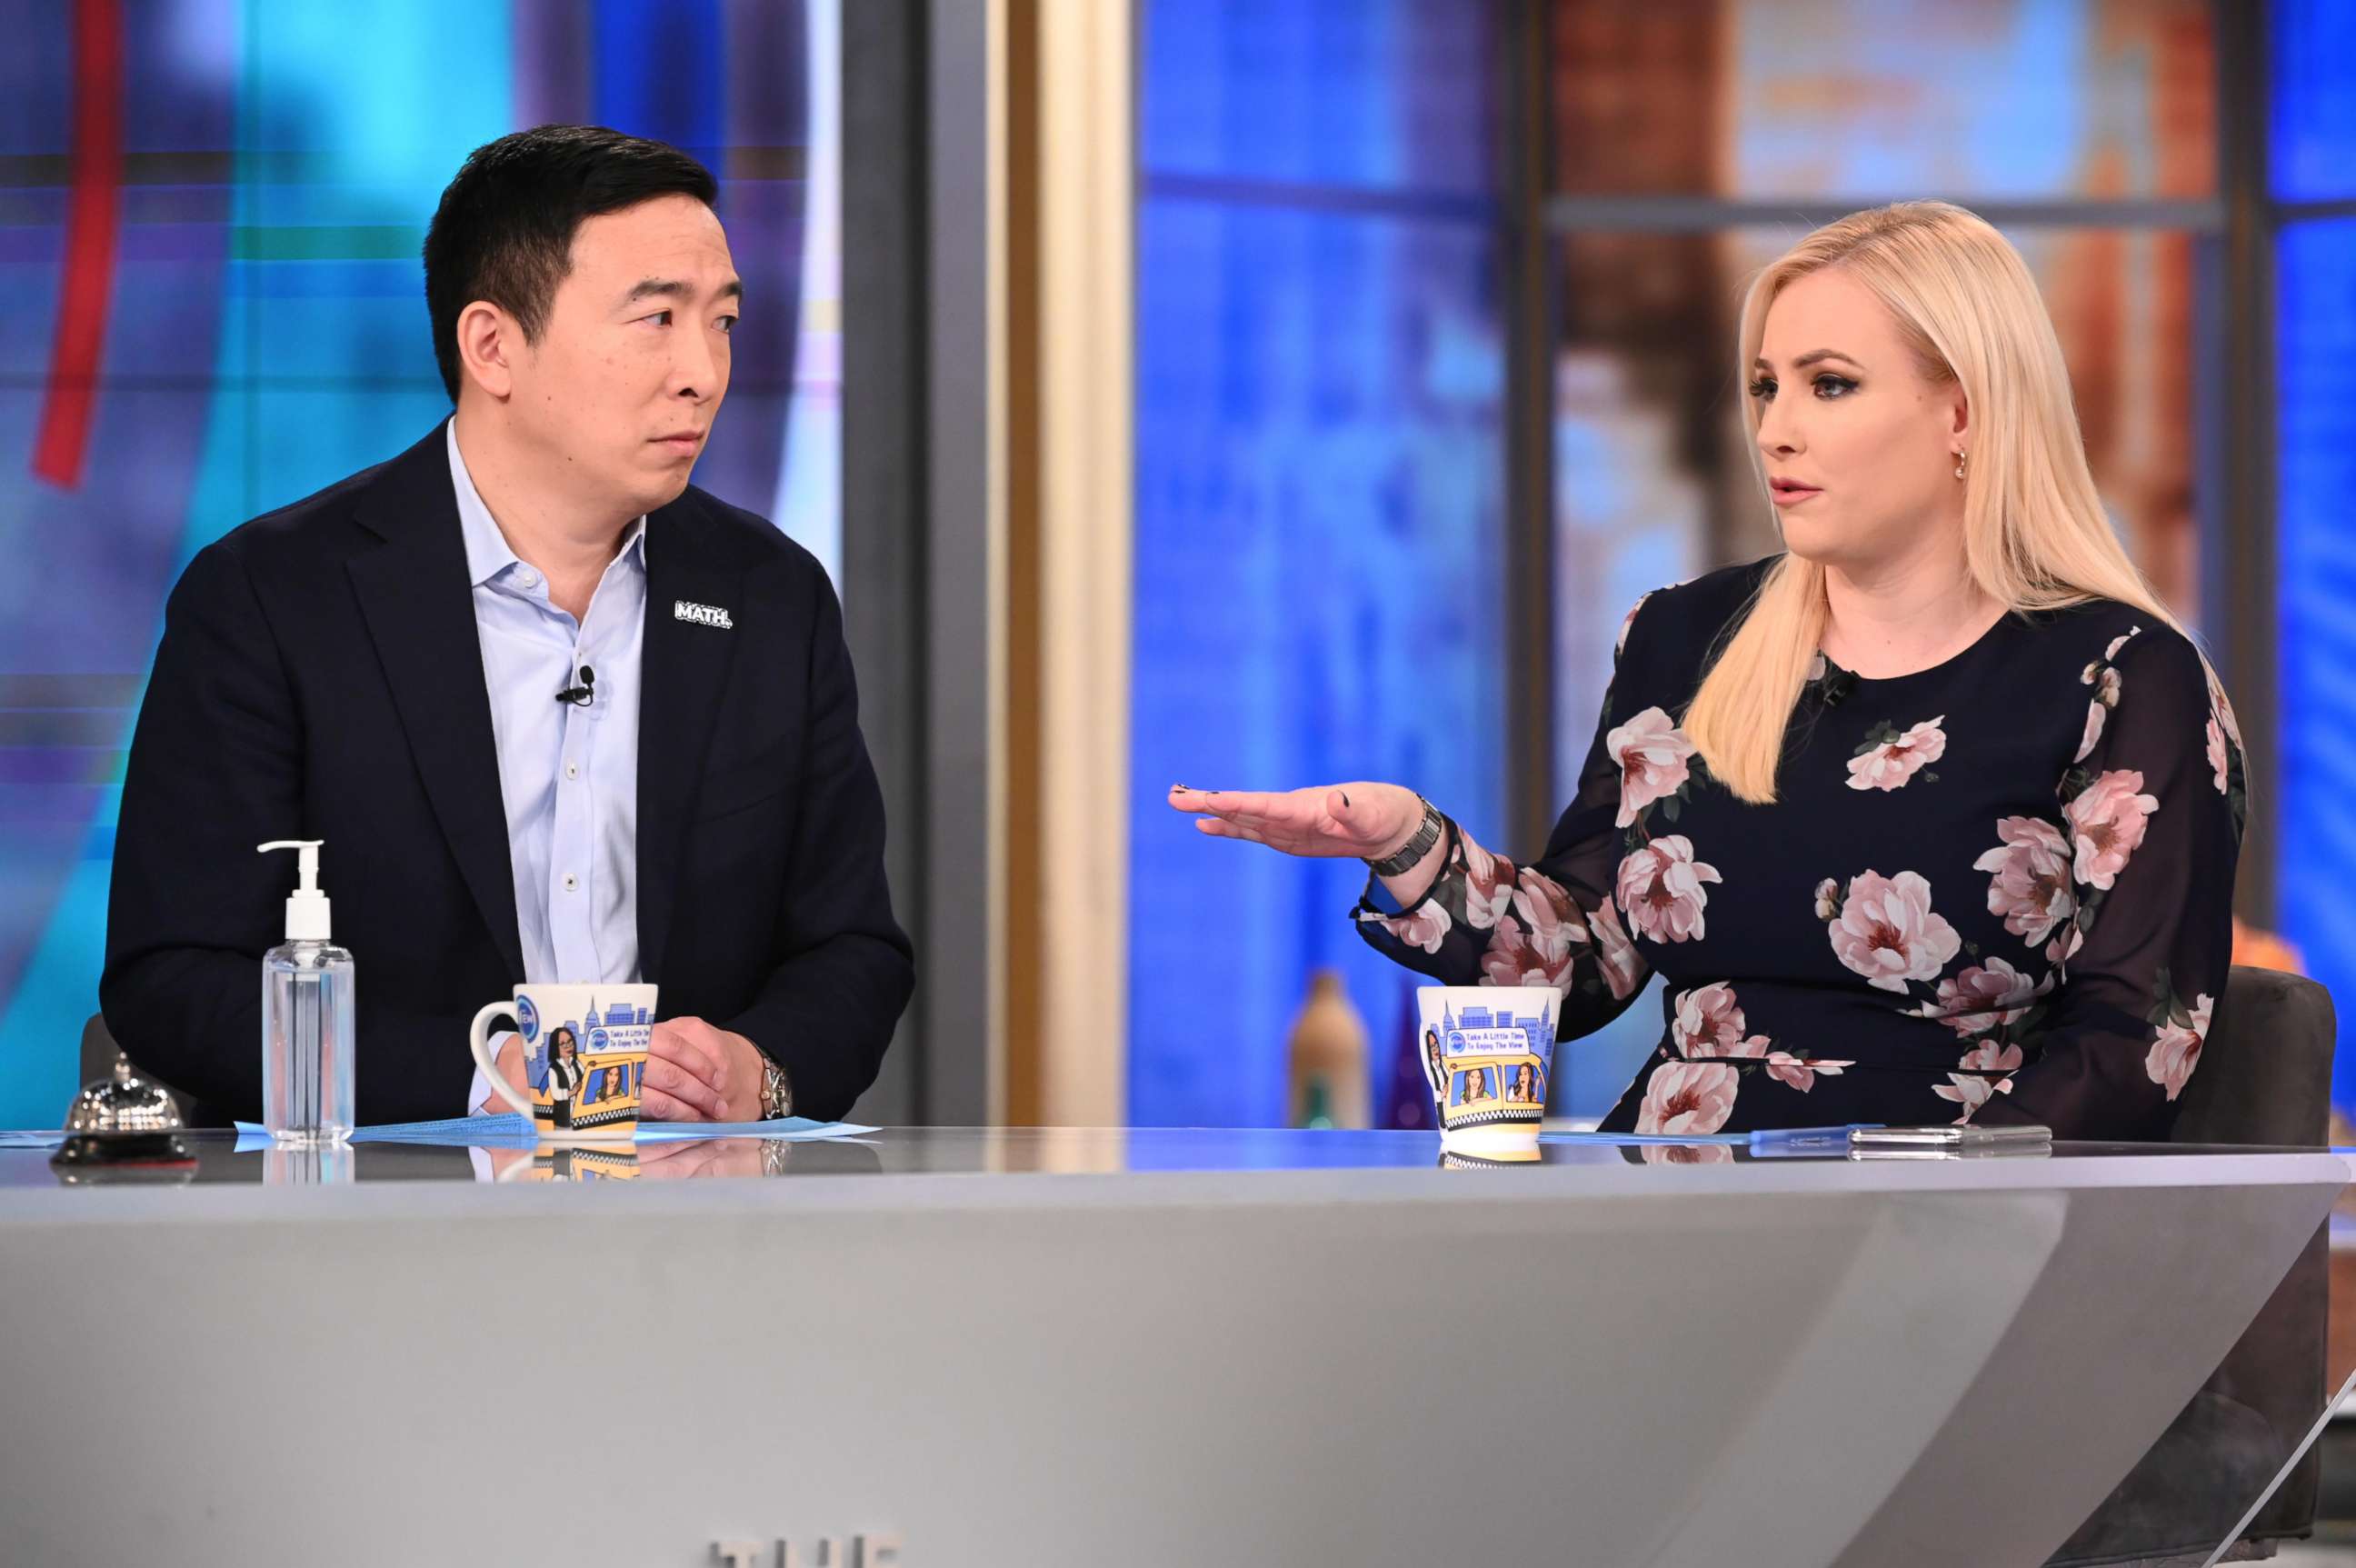 PHOTO: "The View" co-host Meghan McCain talks with Andrew Yang, a guest co-host on the show, on Thursday, March 5, 2020.